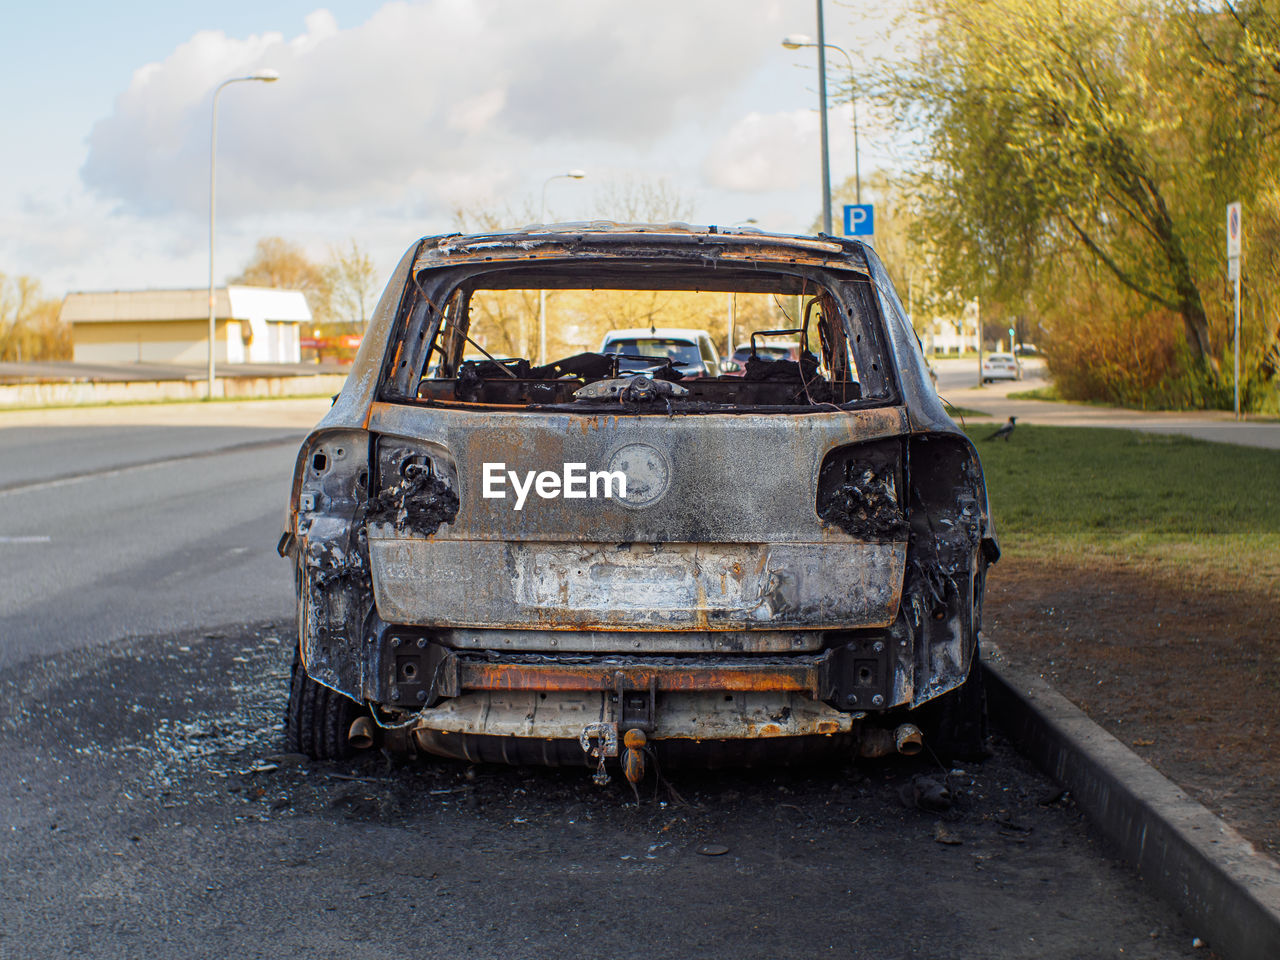 Close rear view to the burned car on the street during the day. selective focus on burned engine.